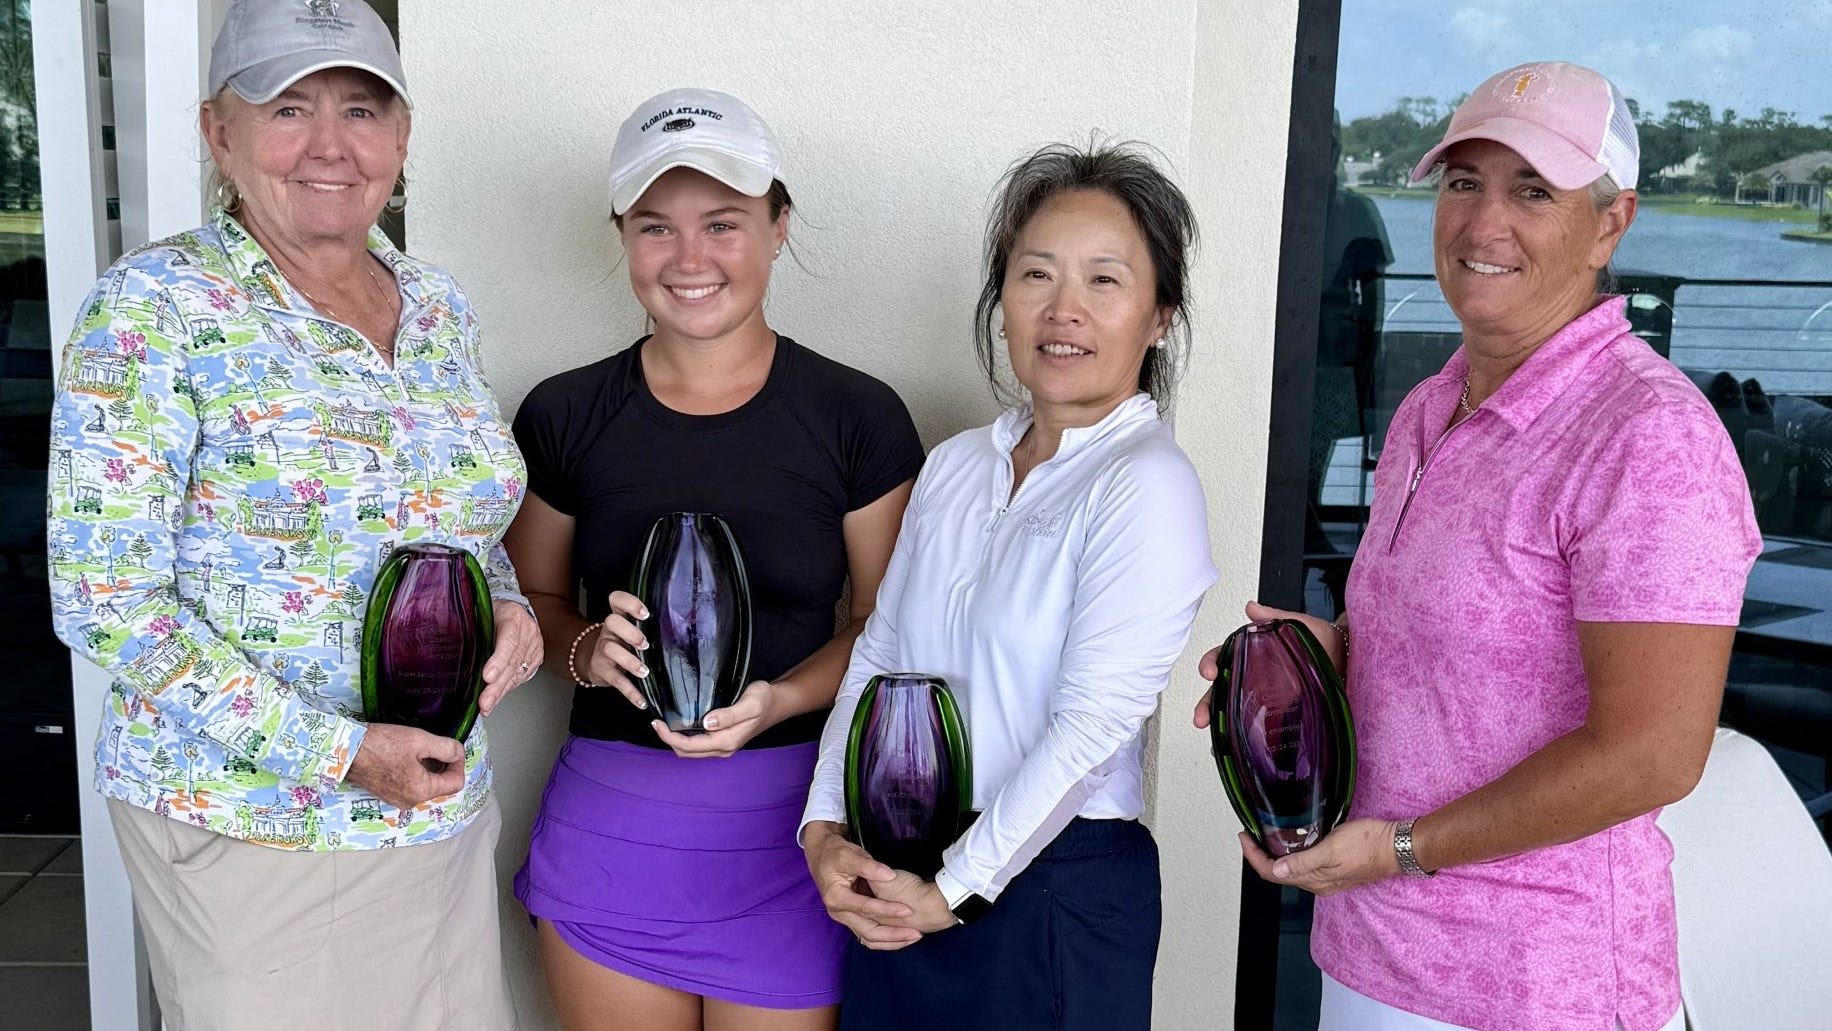 Amelia Cobb of Daytona Beach stayed the course to win the First Coast Women's Amateur